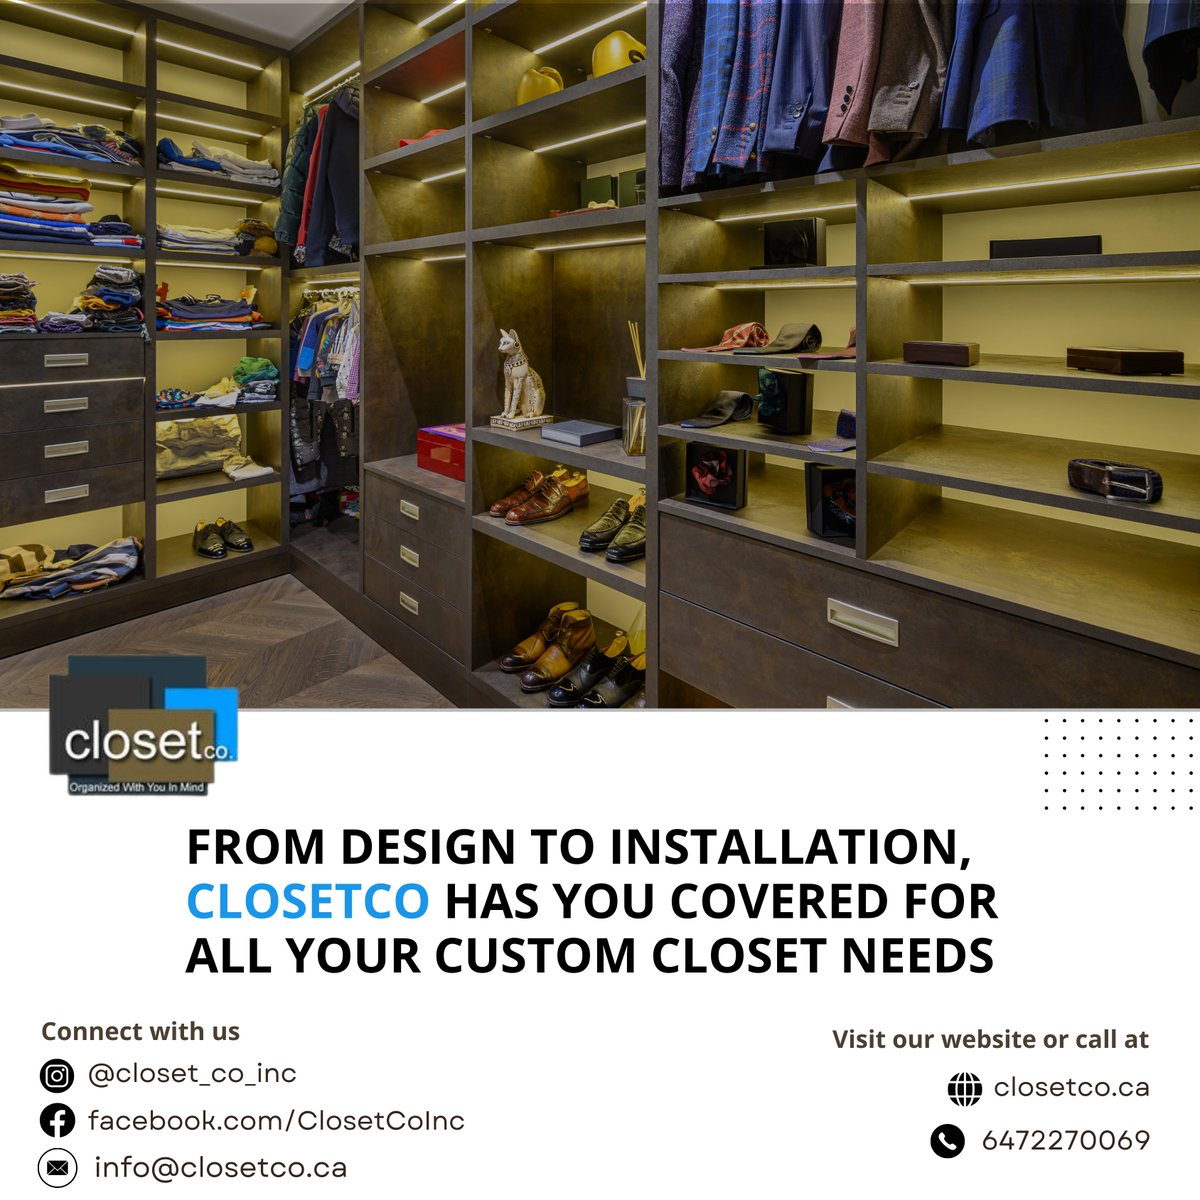 With ClosetCo, you can rest assured that your project will be handled with care from start to finish. 

Link In Bio

#closet #closetorganization #closetroom #customcloset #customclosetdesign #comfort #spacious #uniquedesign #customkitchen #stylishspace #freeconsultation #canada